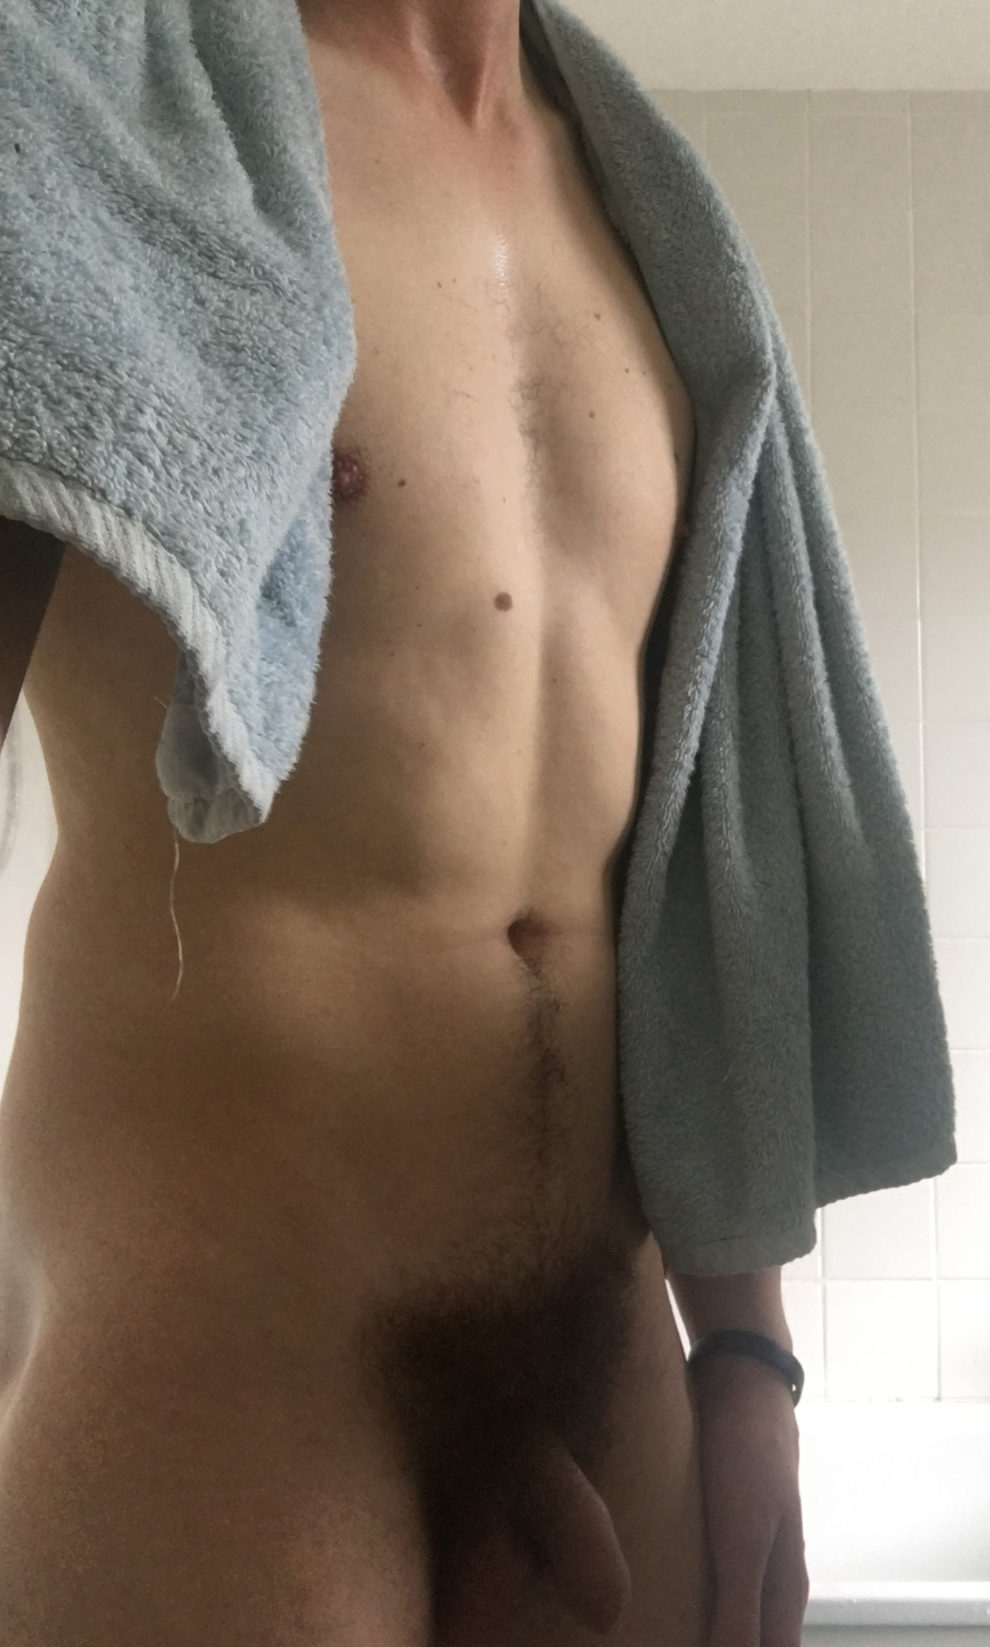 24(M) Fresh out the shower. PMs welcomed :)